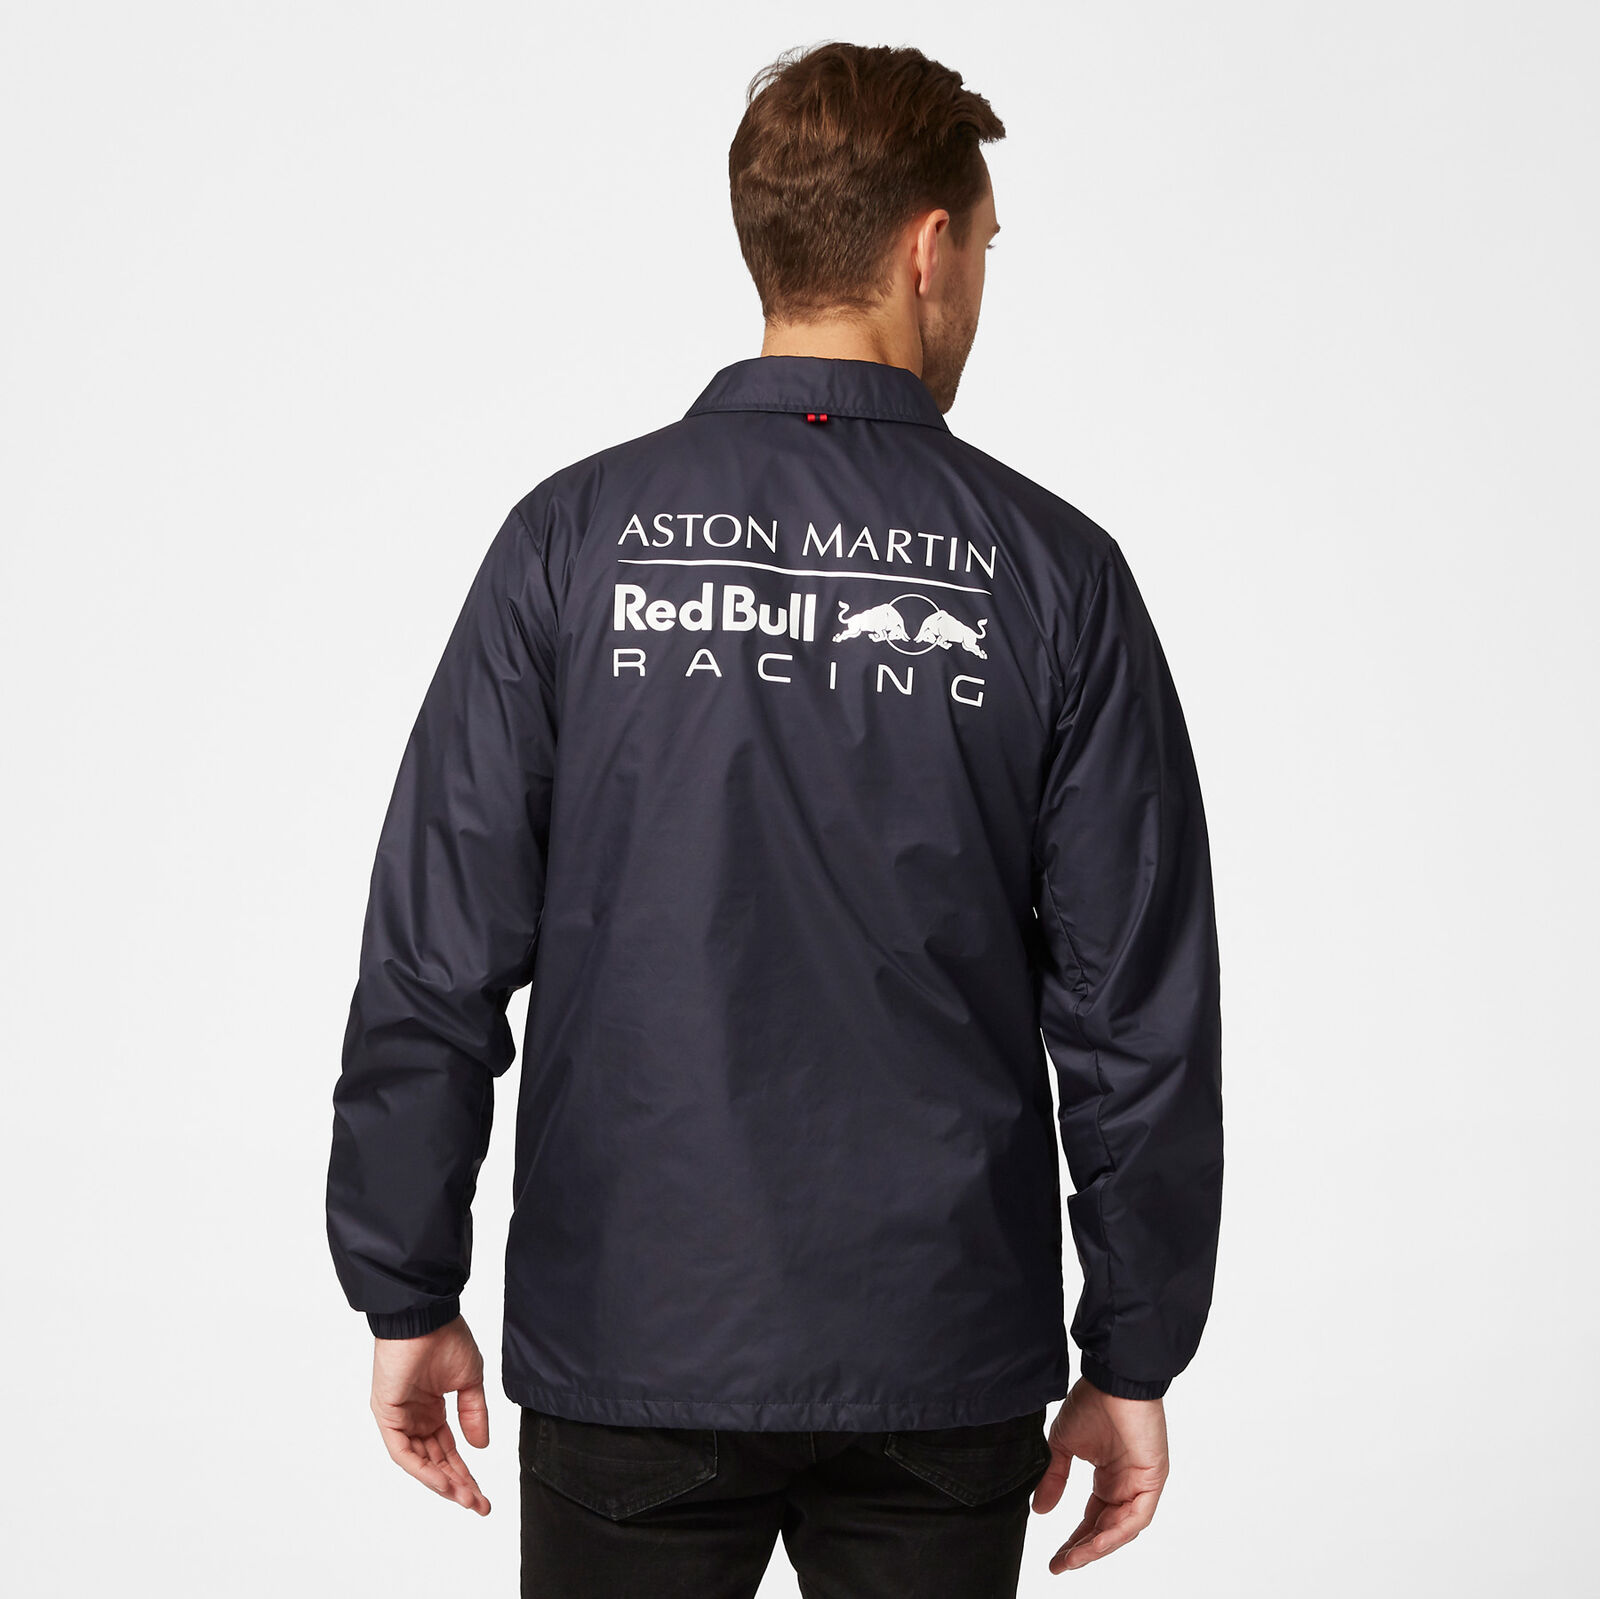 Coach Jacket - Red Bull Racing | Fuel For Fans